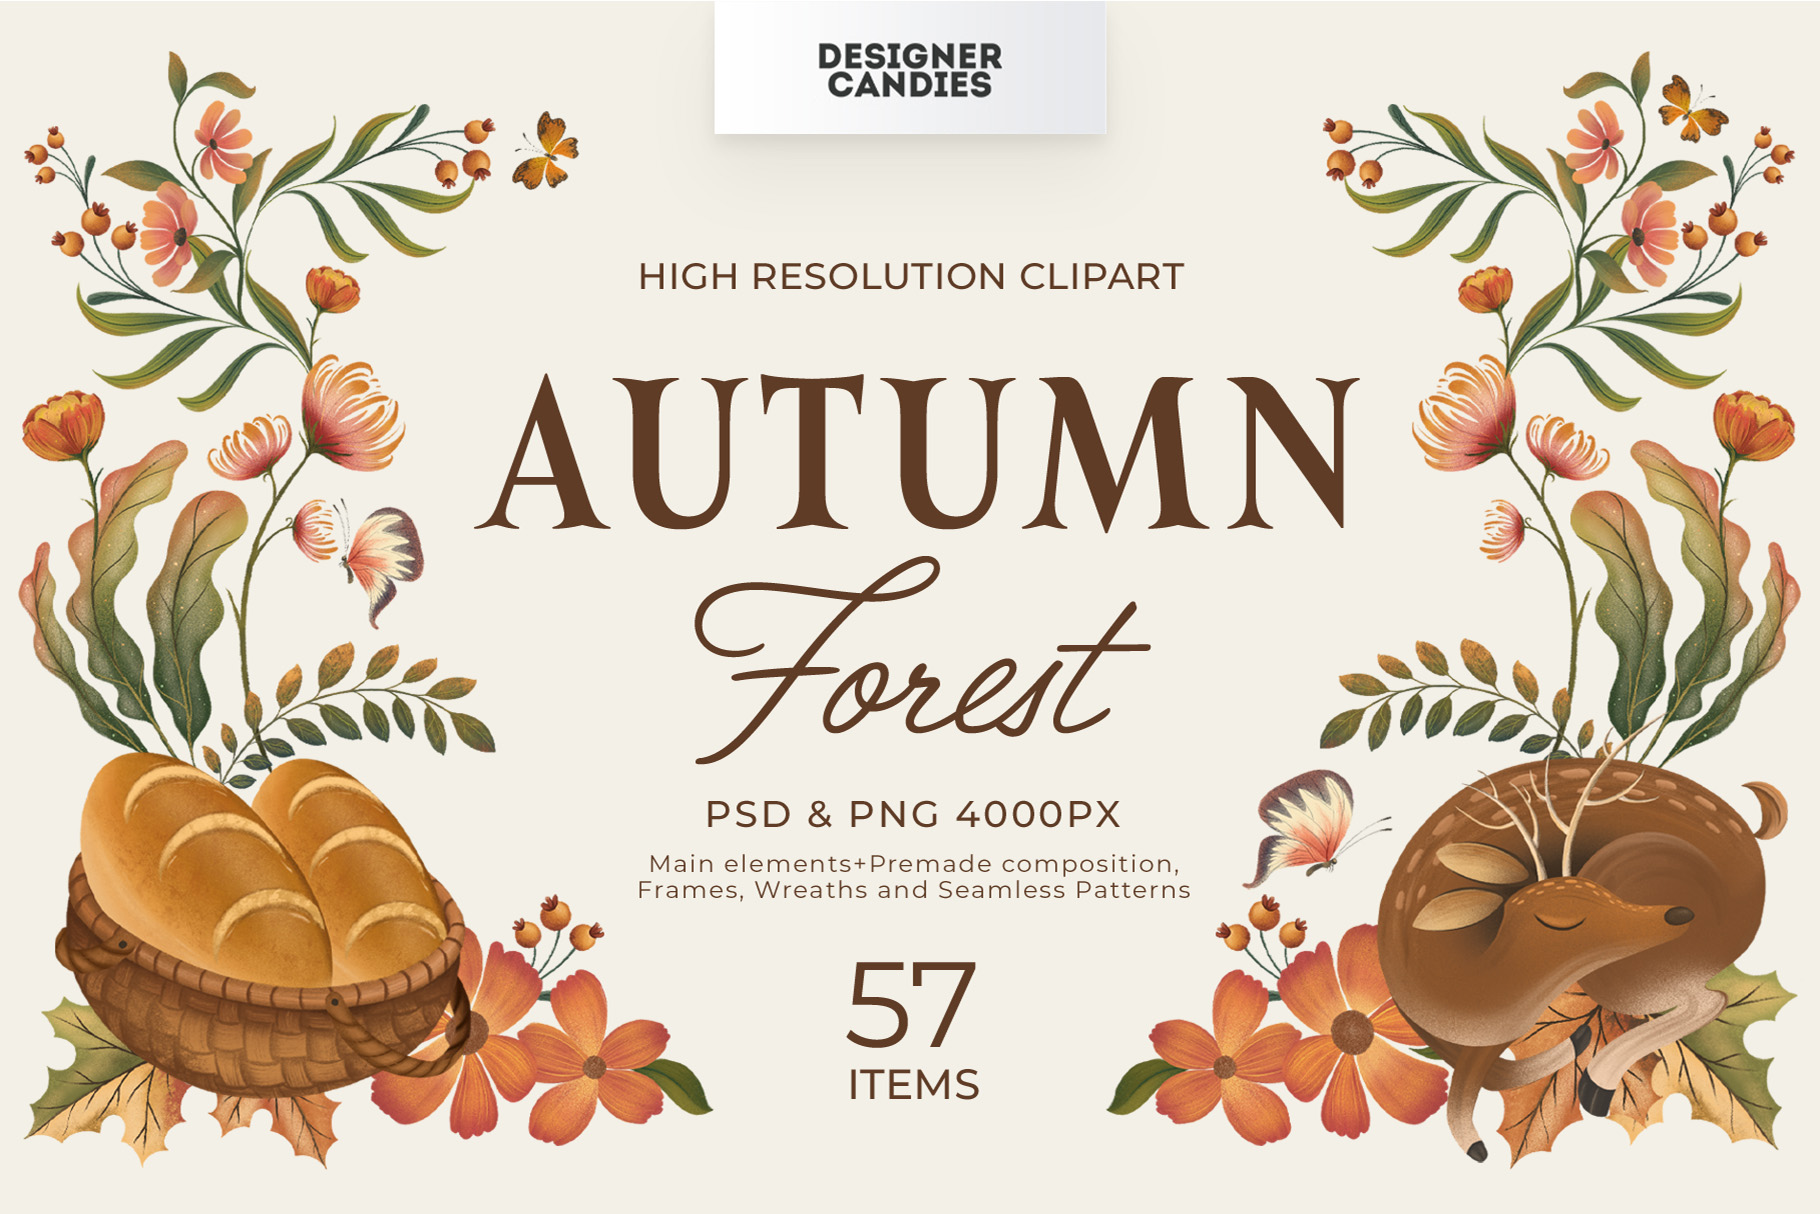 Collection of Autumn & Fall Clipart Illustrations Inspired by an Autumnal Forest (PSD, PNG Format)